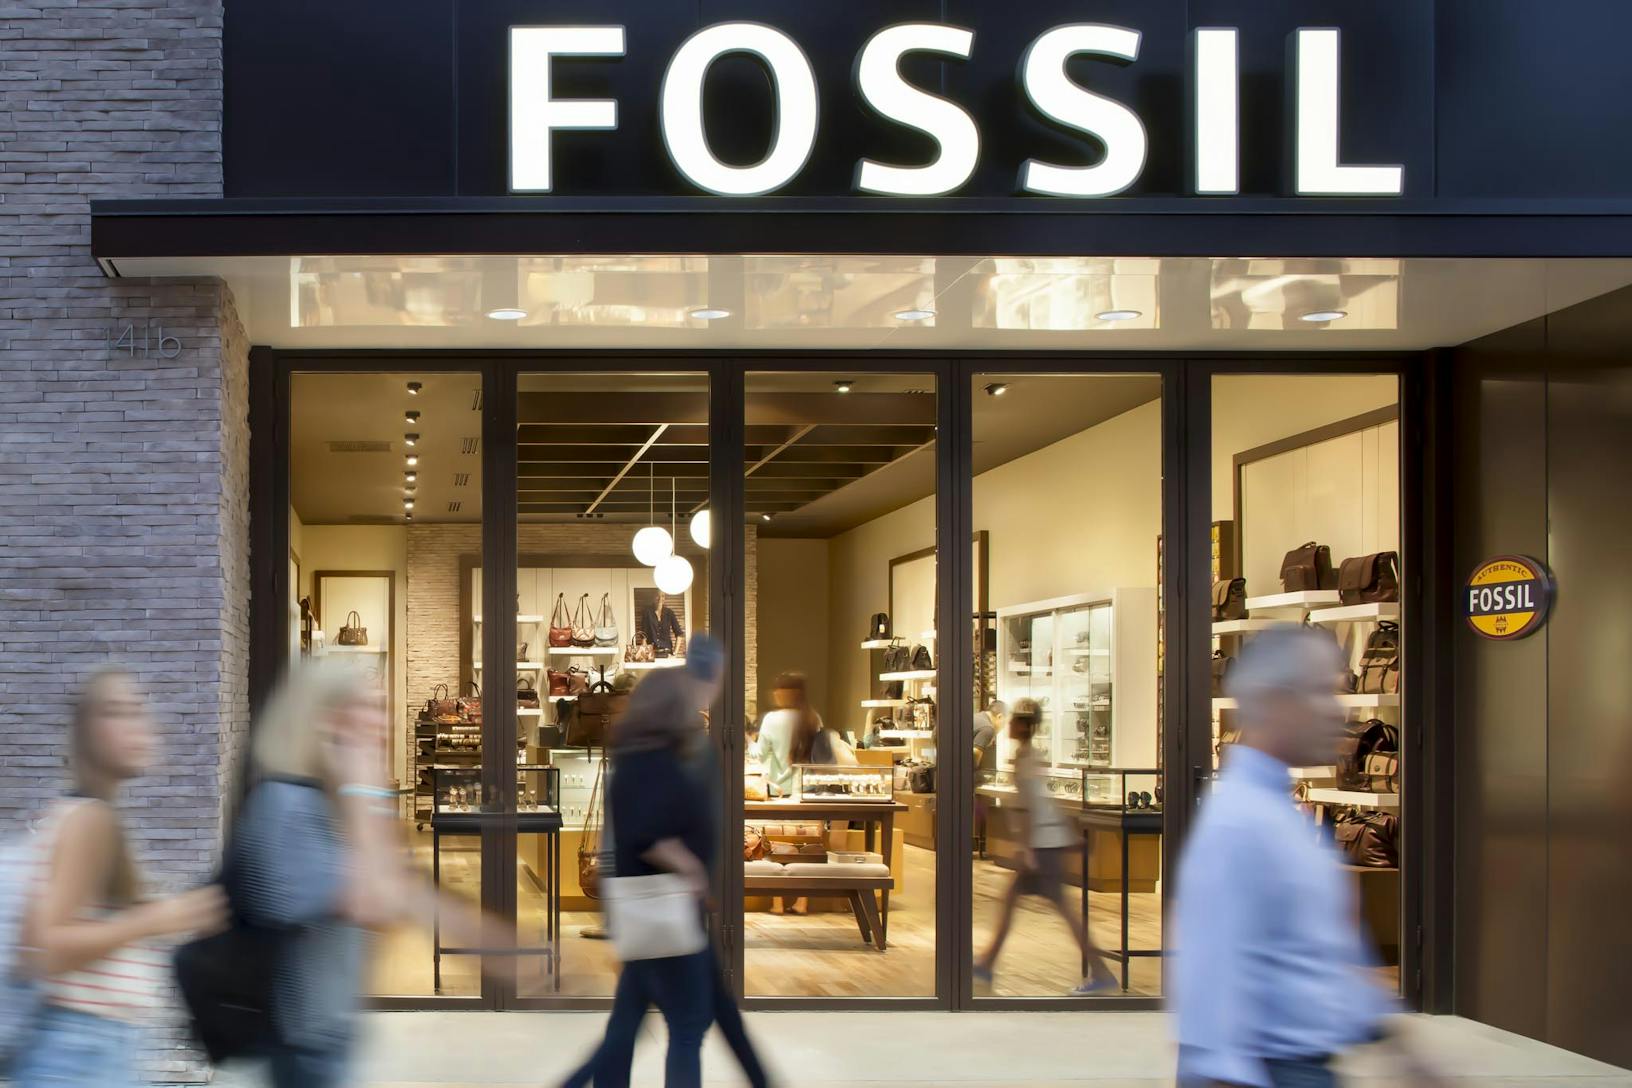 SL70 Retail Folding Entry Doors at the Fossil Store in Santa Monica, CA - Closed Exterior Night View